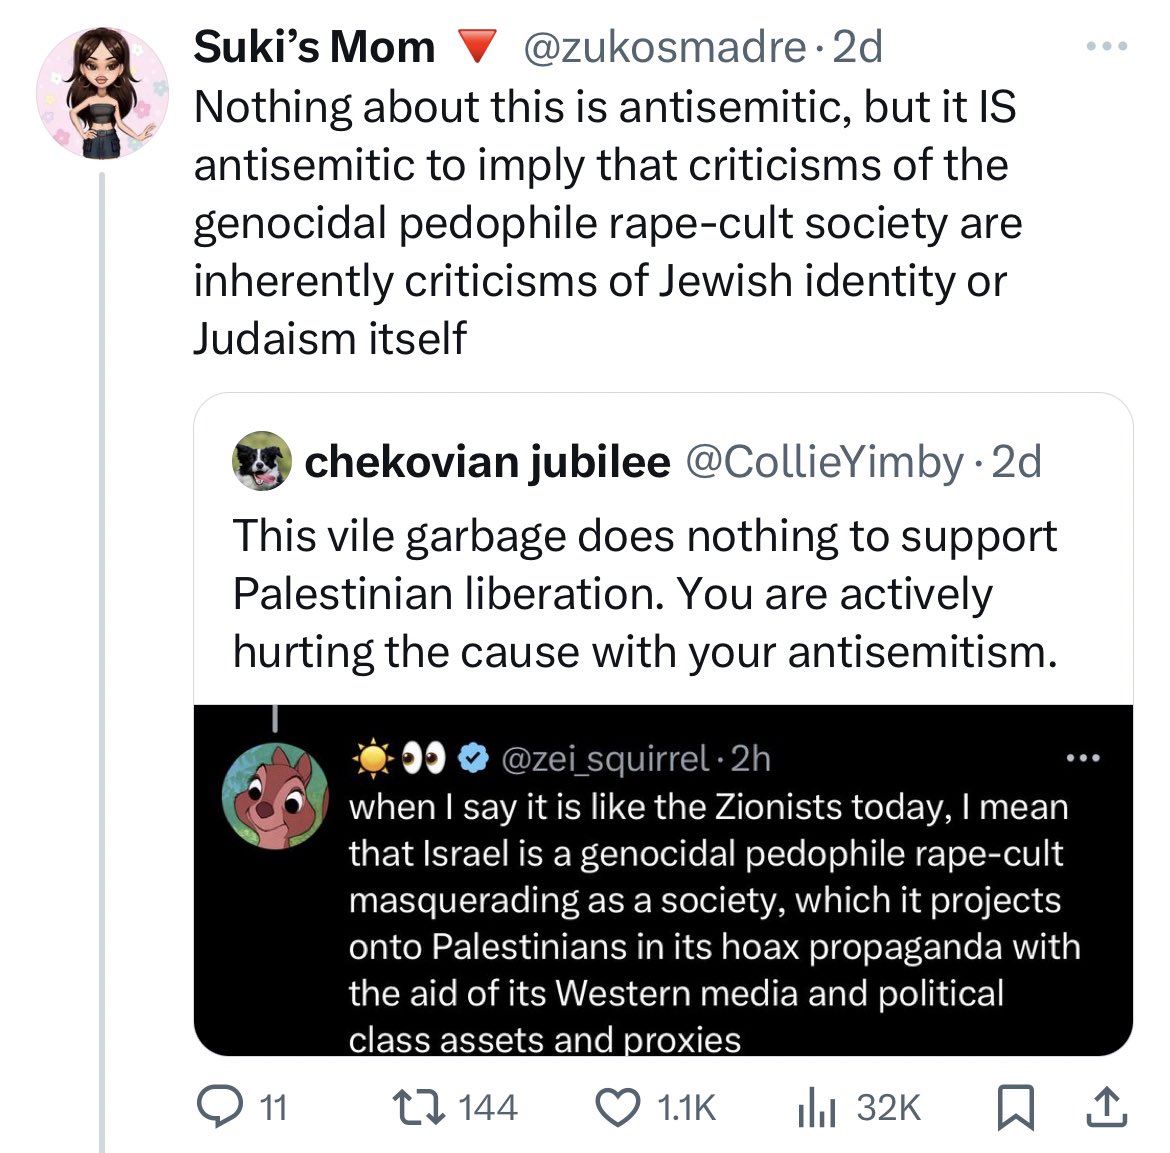 Definitely not anti-Semitic to describe the one Jewish state on Earth as “the genocidal pedophile rape cult society”